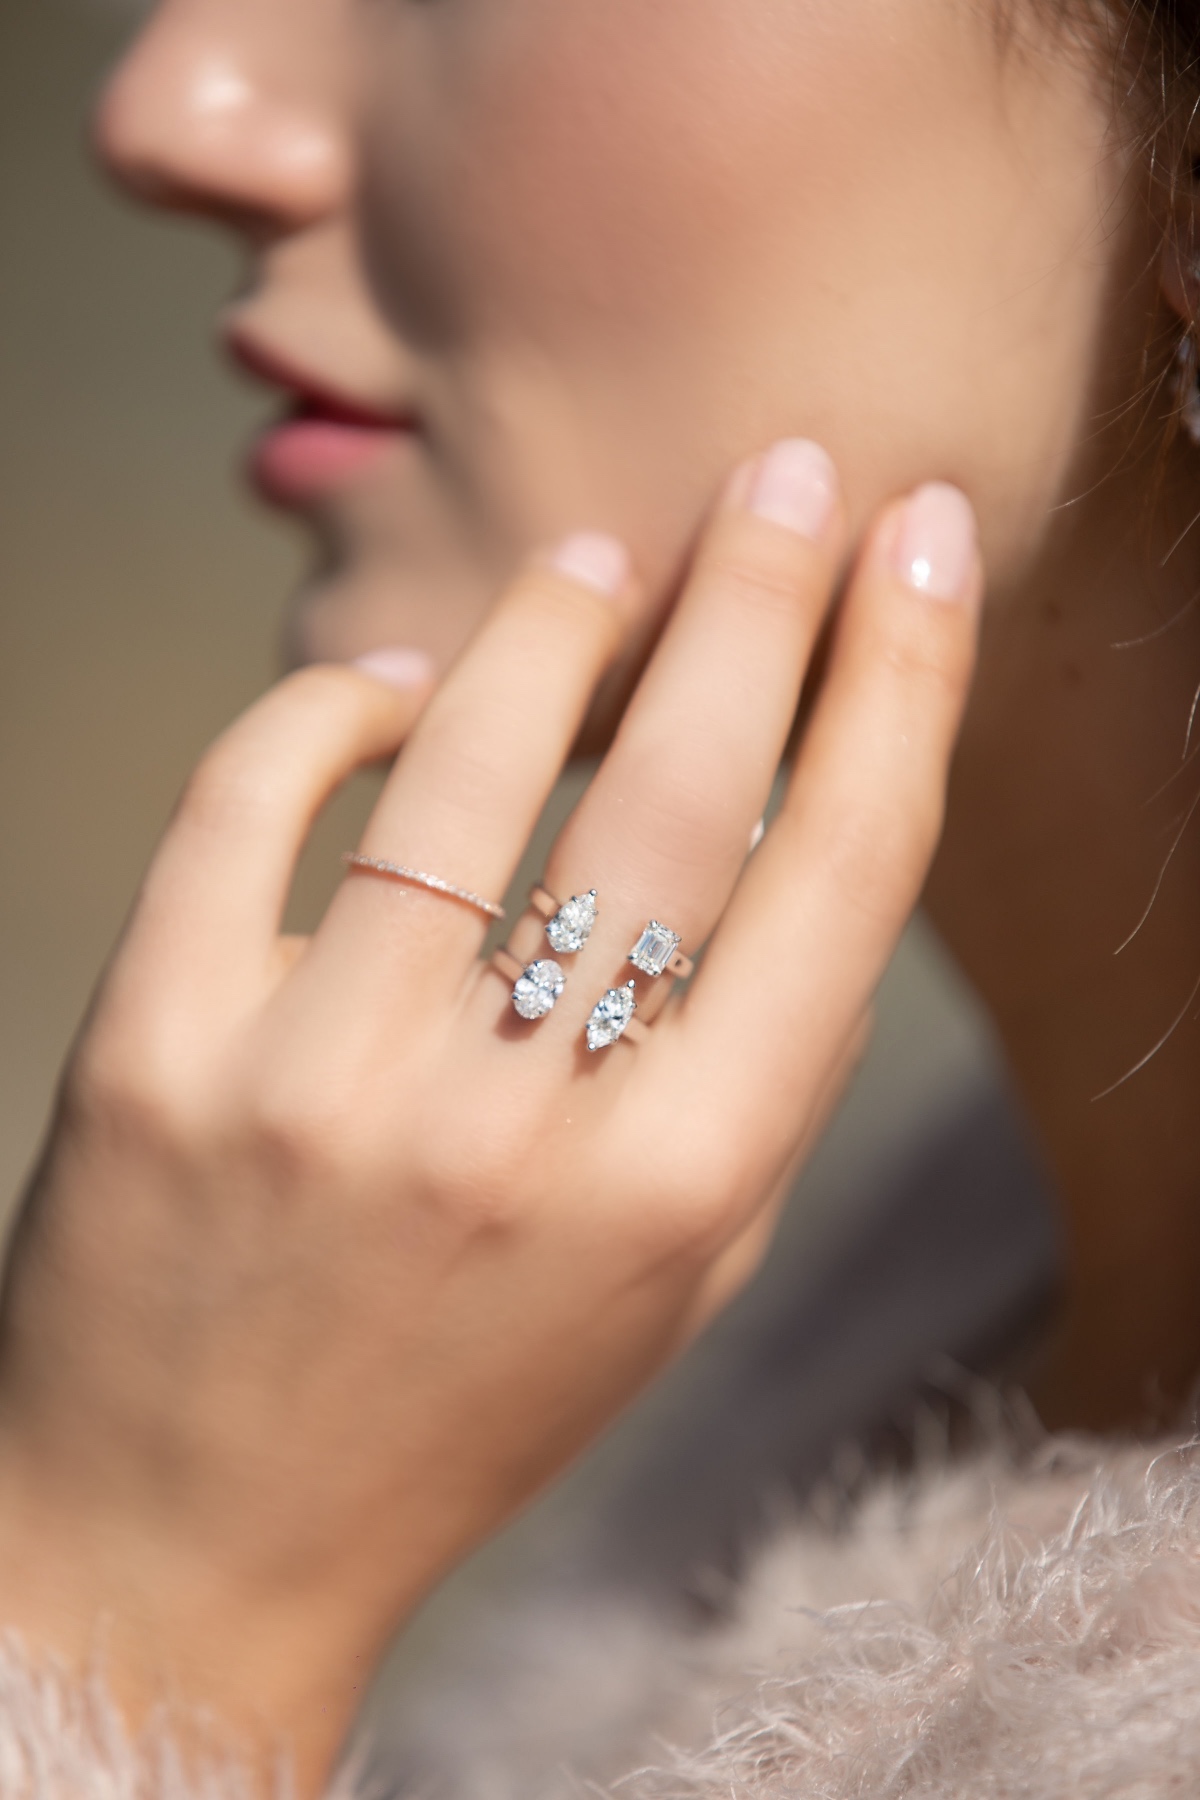 Intention Diamonds: The new, and fabulously inspiring diamond shopping trend